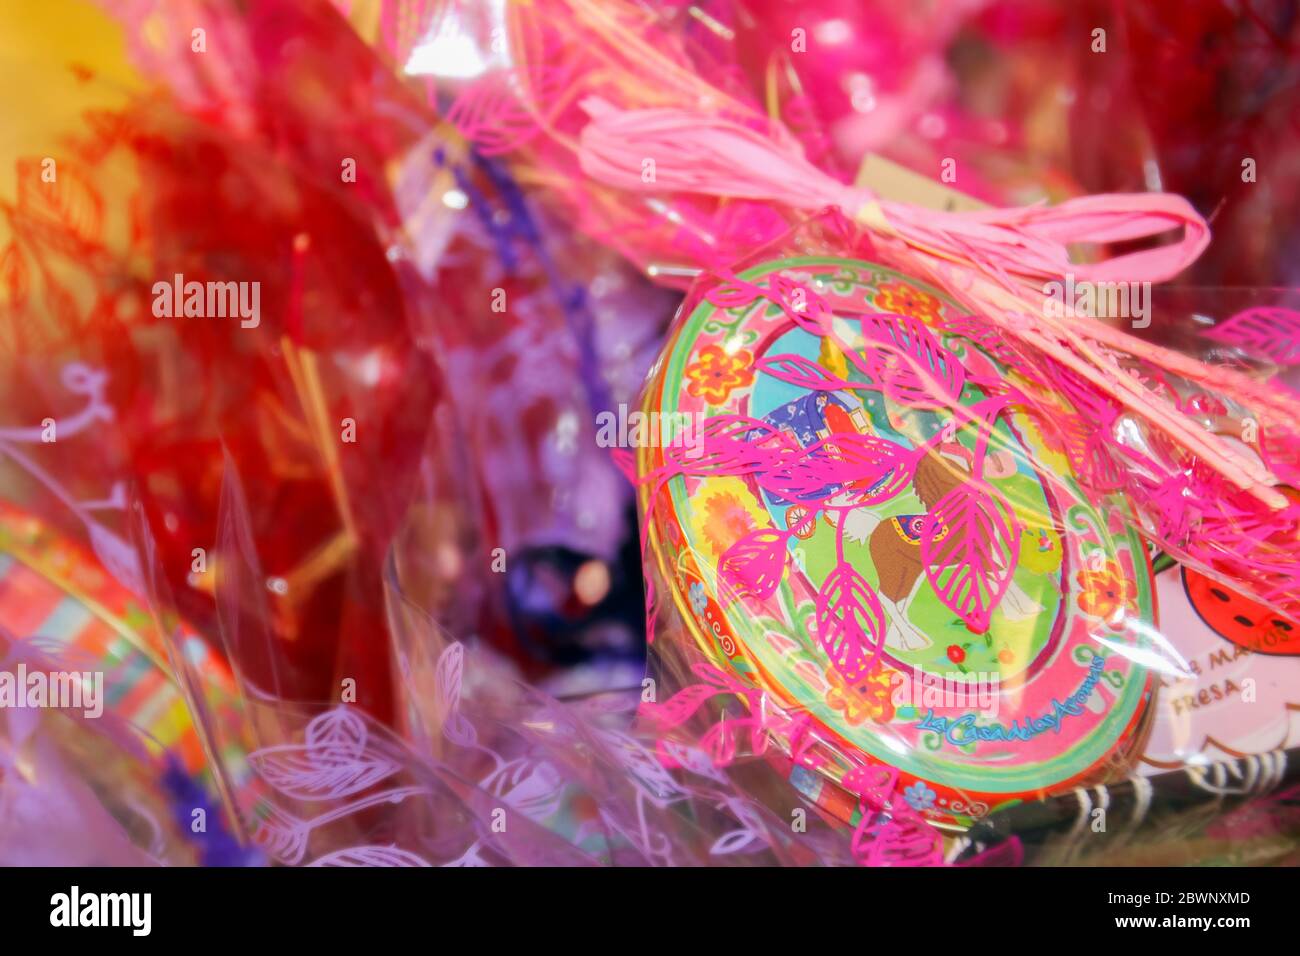 Textured drawing in a small metal oval box of candy with plastic wrap. Stock Photo